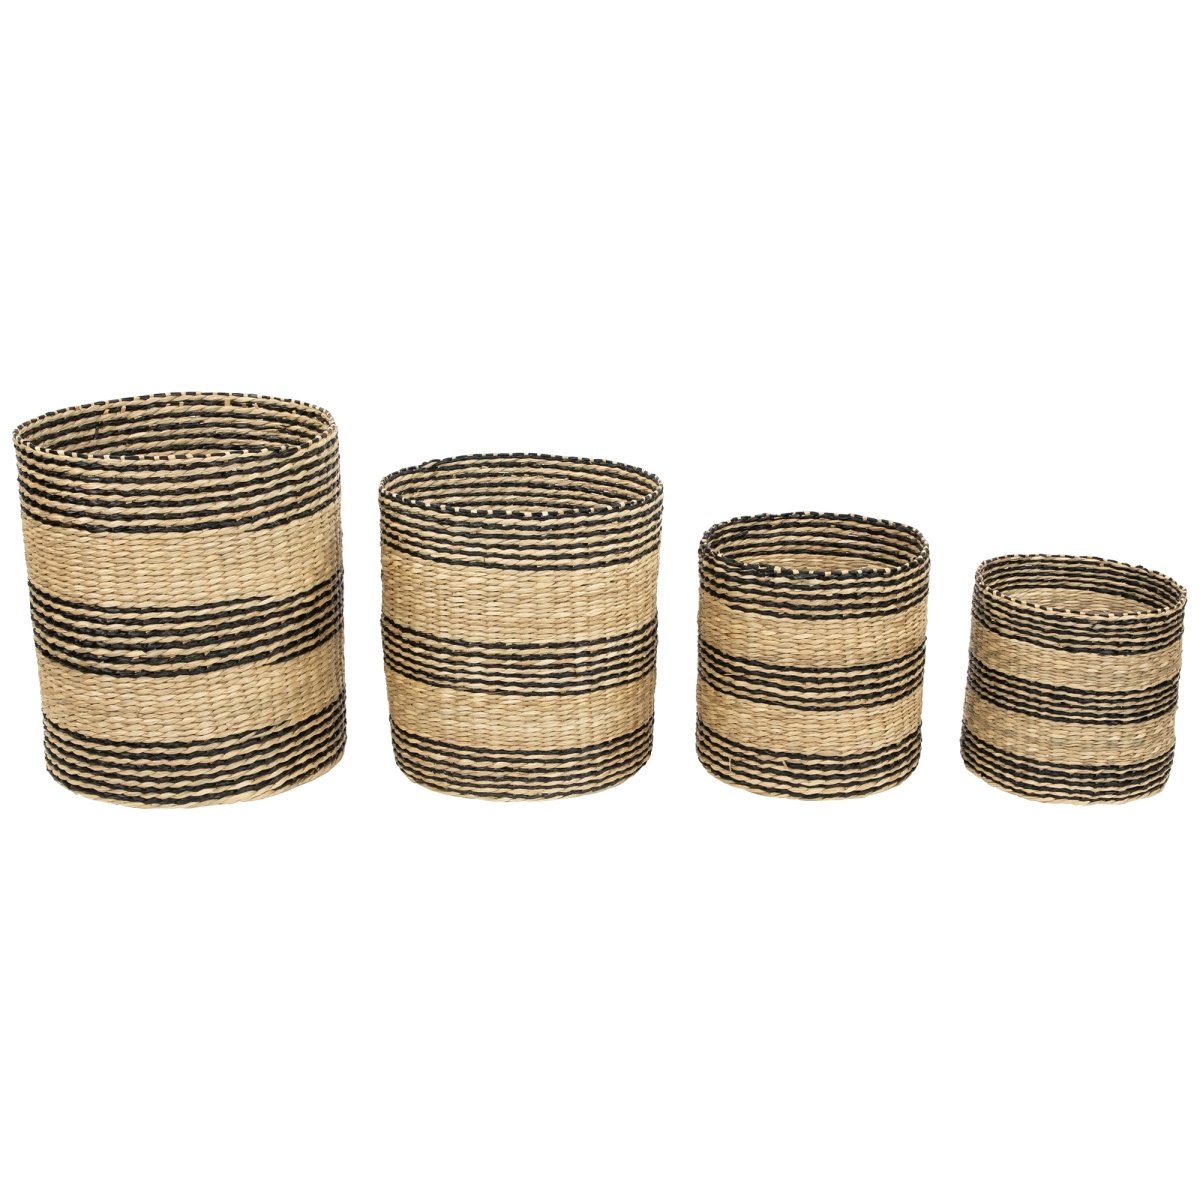 Picture of Northlight 35737387 12 in. Beige & Black Striped Woven Round Seagrass Baskets - Set of 4